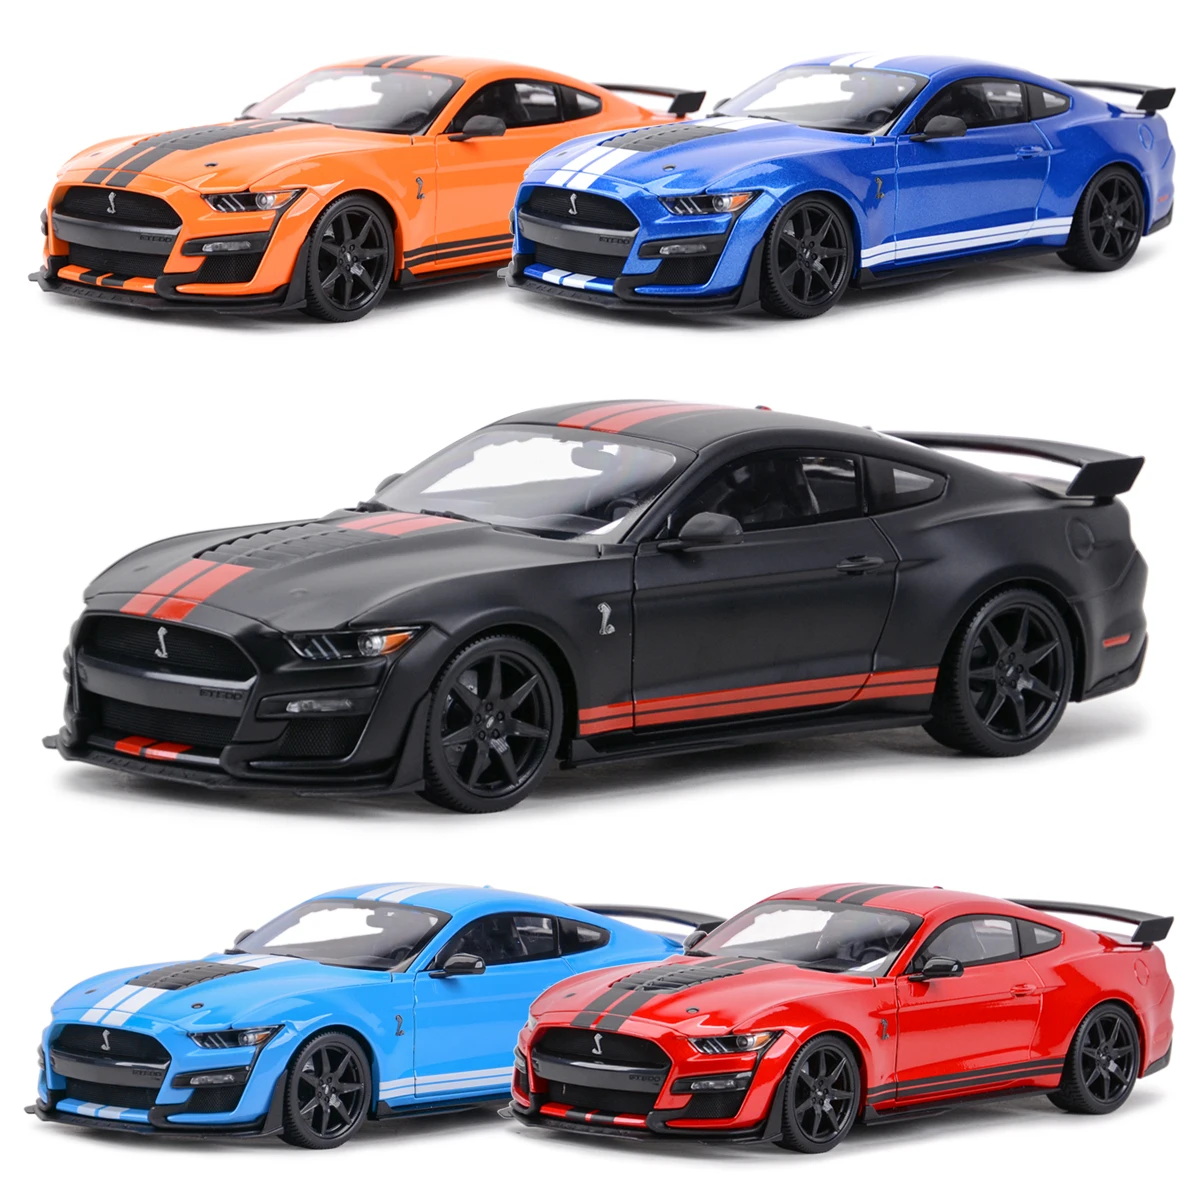 

Maisto 1:18 2020 Mustang Shelby GT500 Ford Sports Car Static Die Cast Vehicles Collectible Model Car Toys